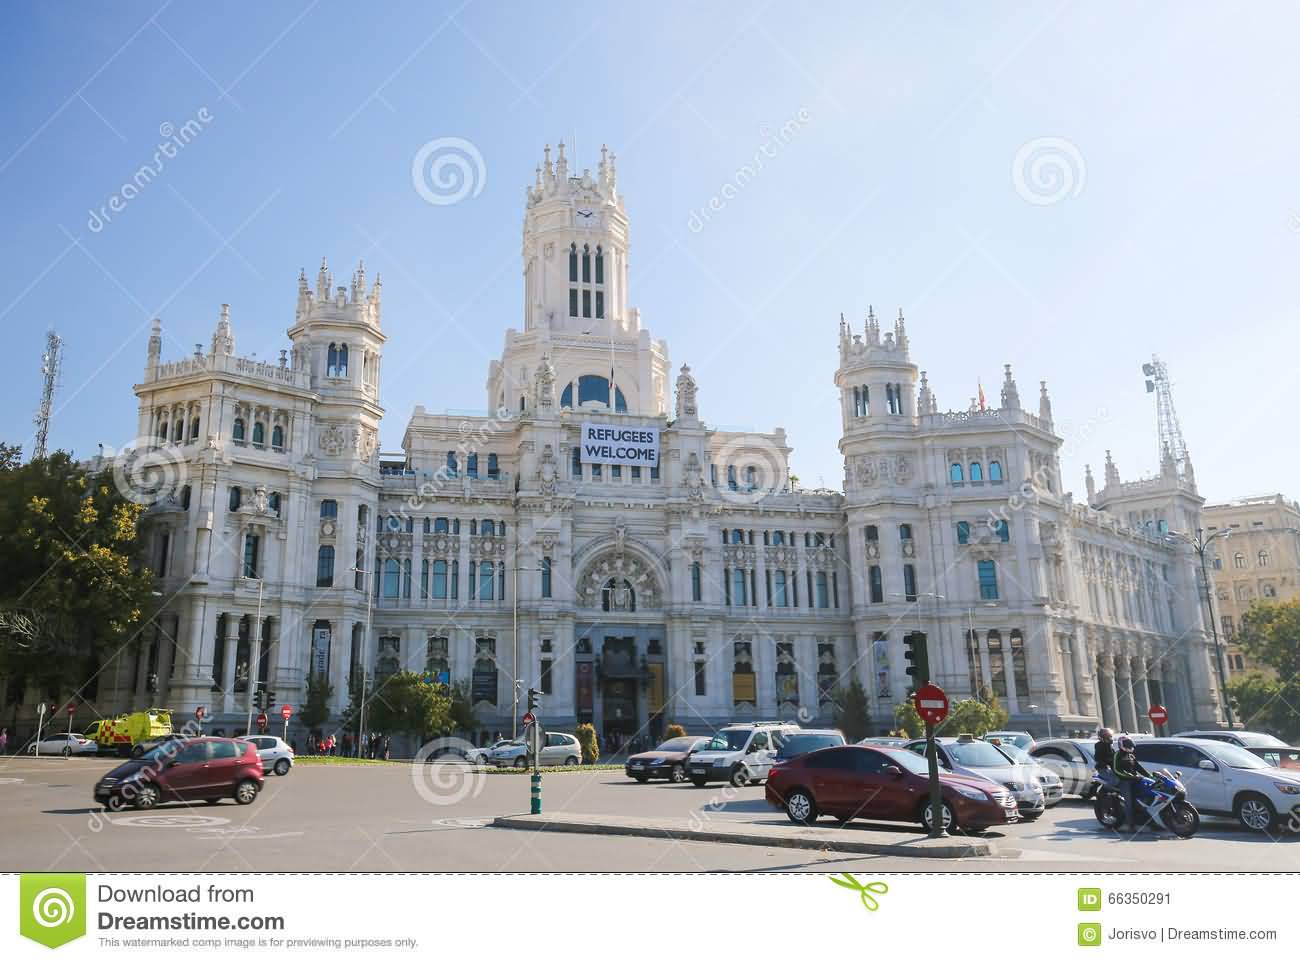 Front View Of The Cybele Palace At Plaza de Cibeles In Madrid